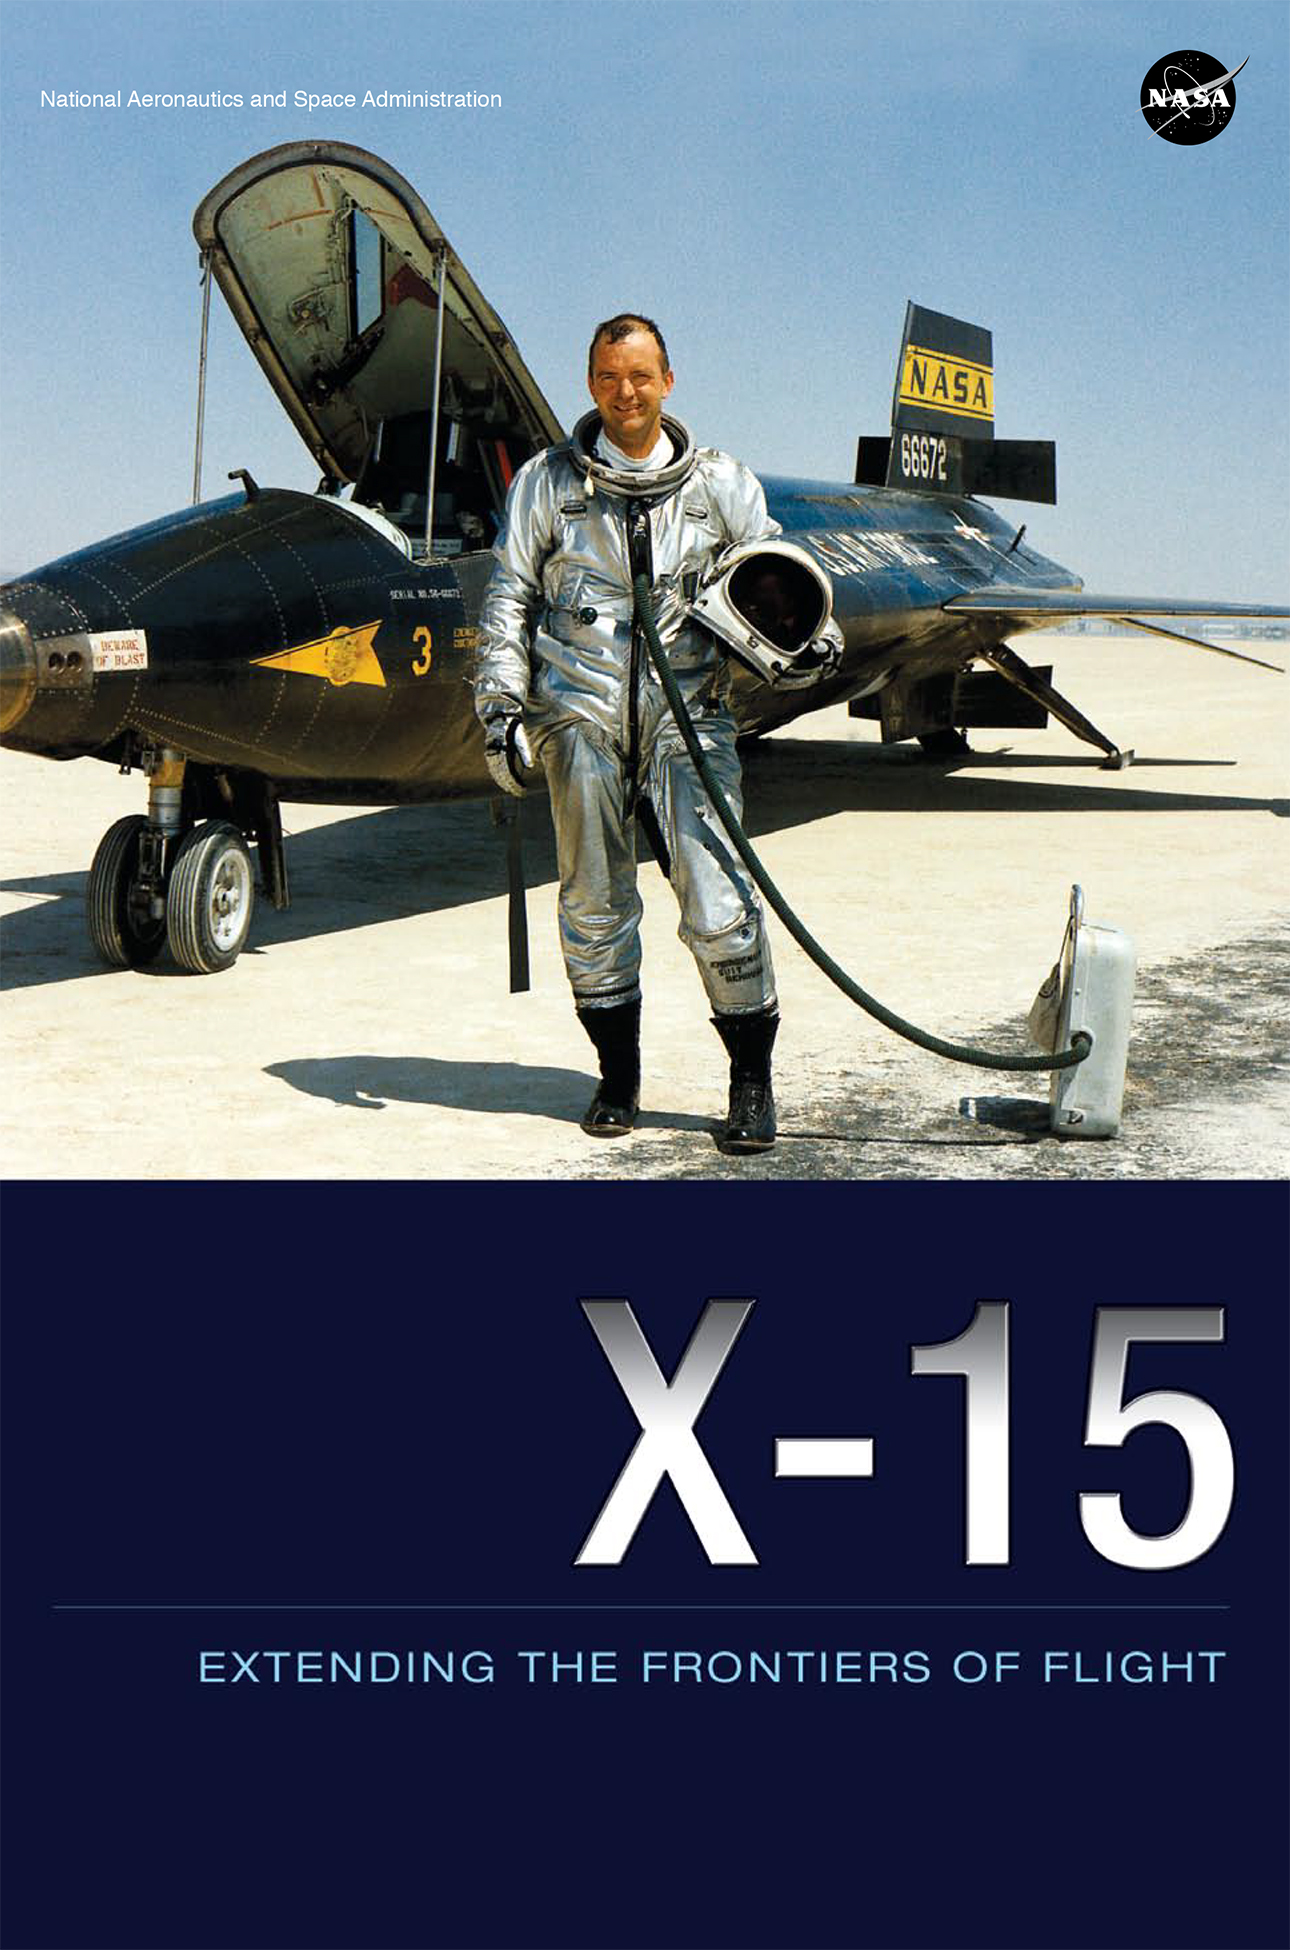 X-15 Extending the Frontiers of Flight Book Cover.